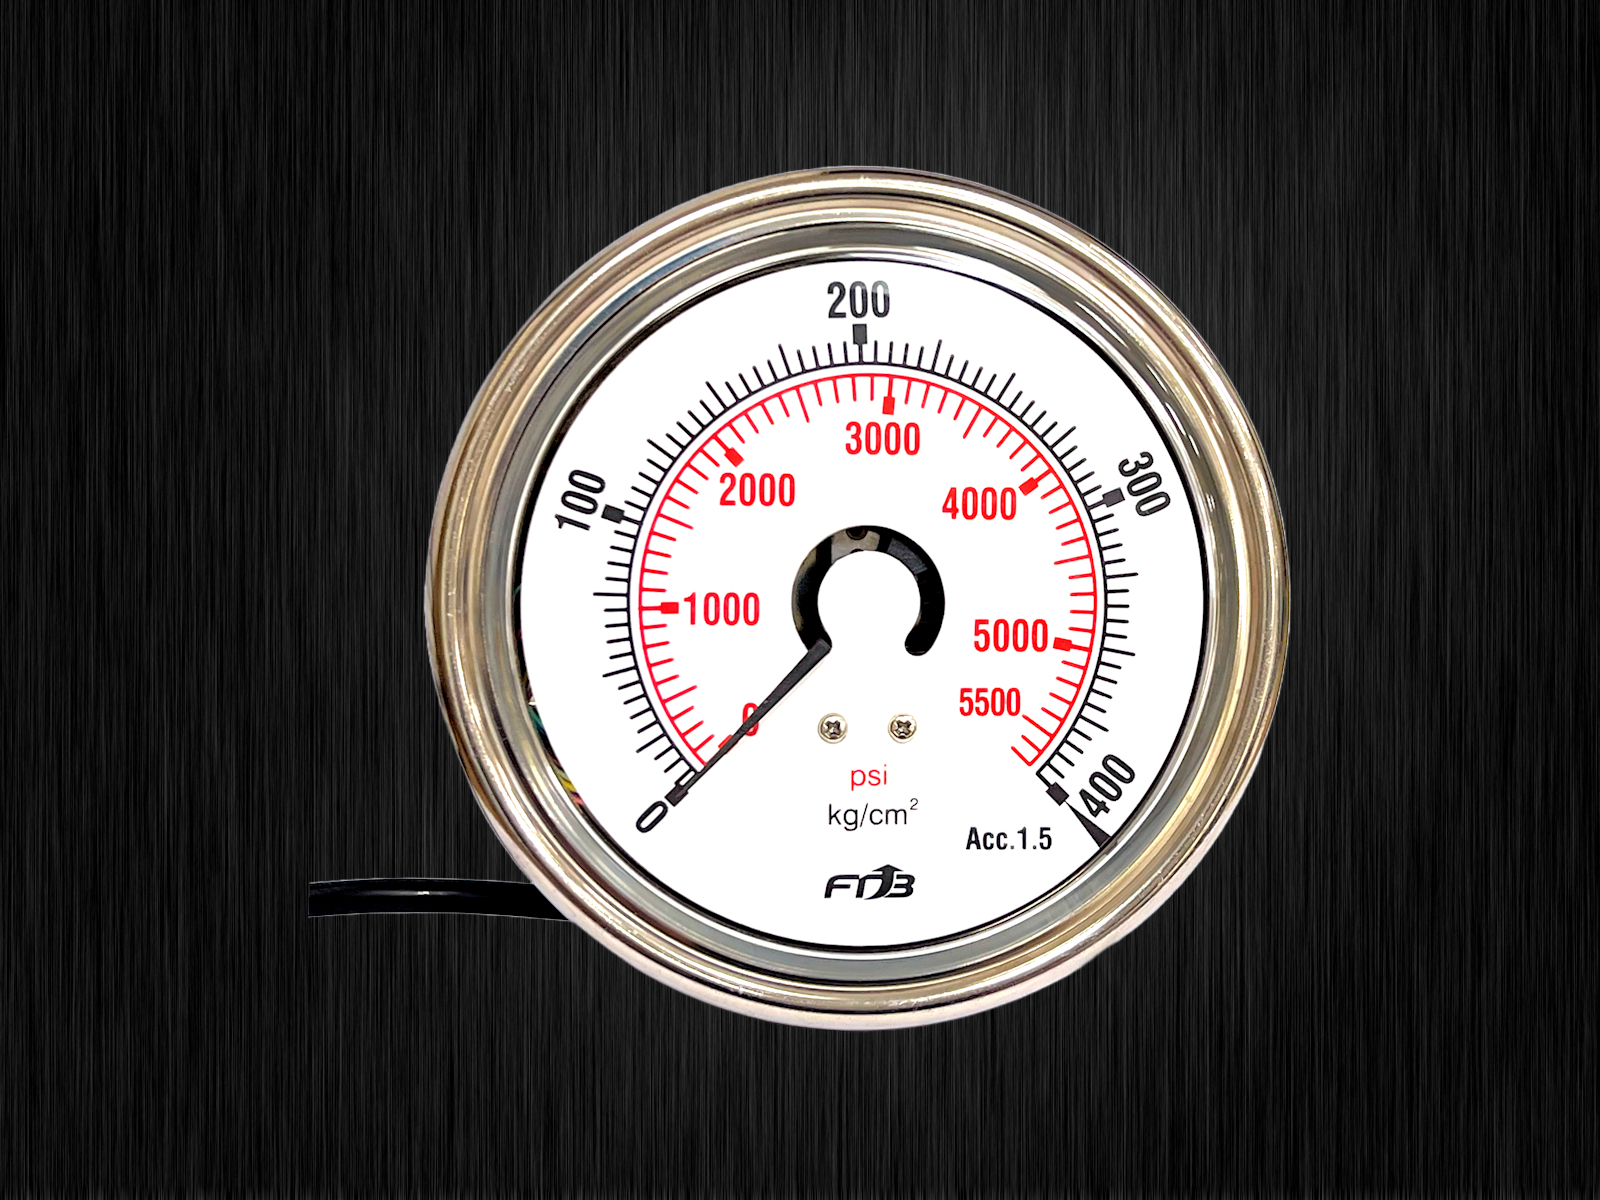 Mechanical Pressure Gauge with Output Signals